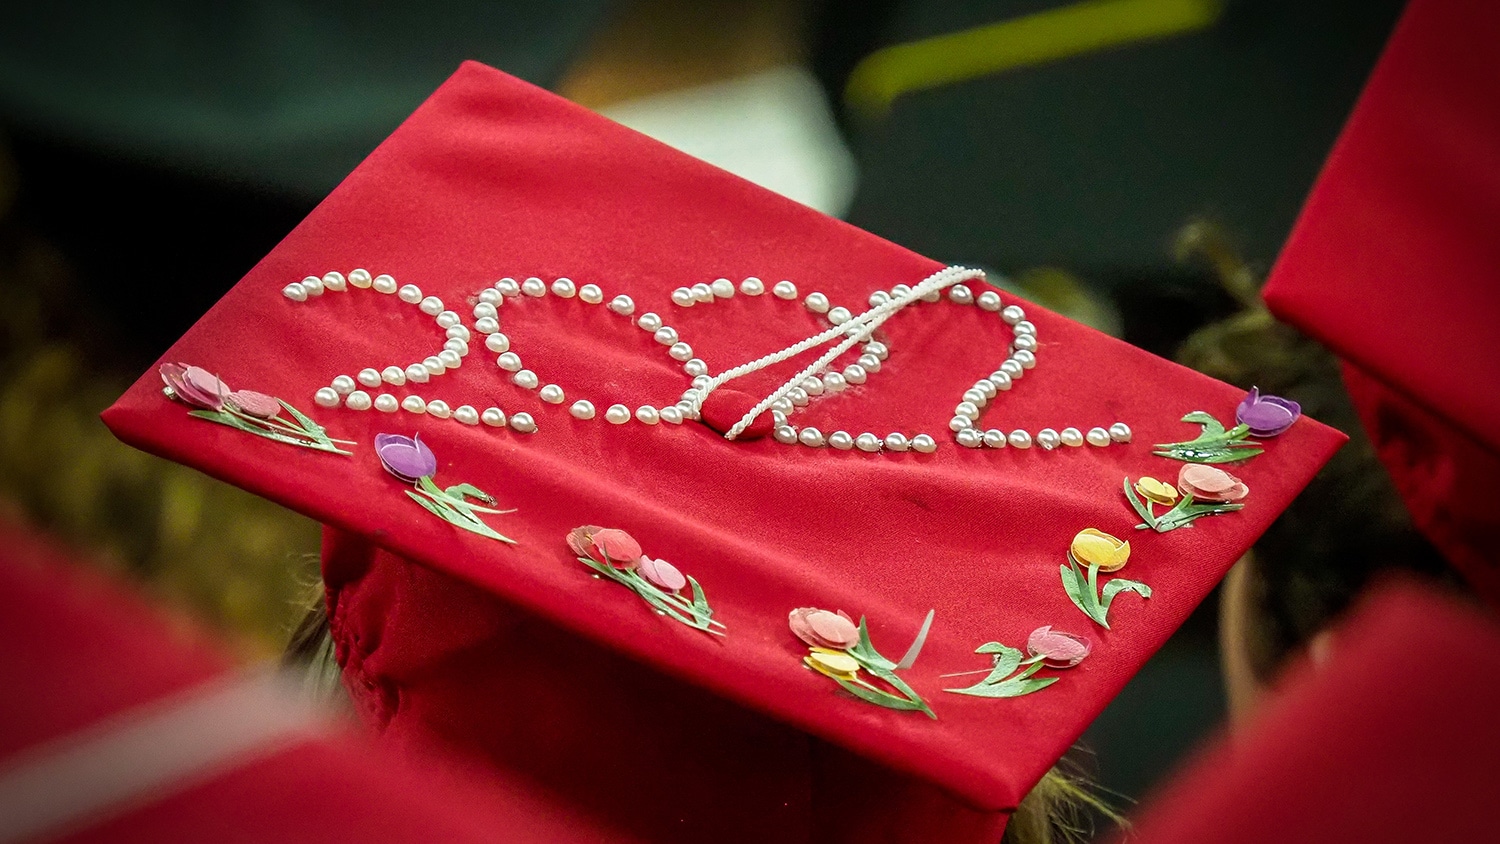 The top of a red graduation cap is embellished with flowers and pearls that spell out "2022".